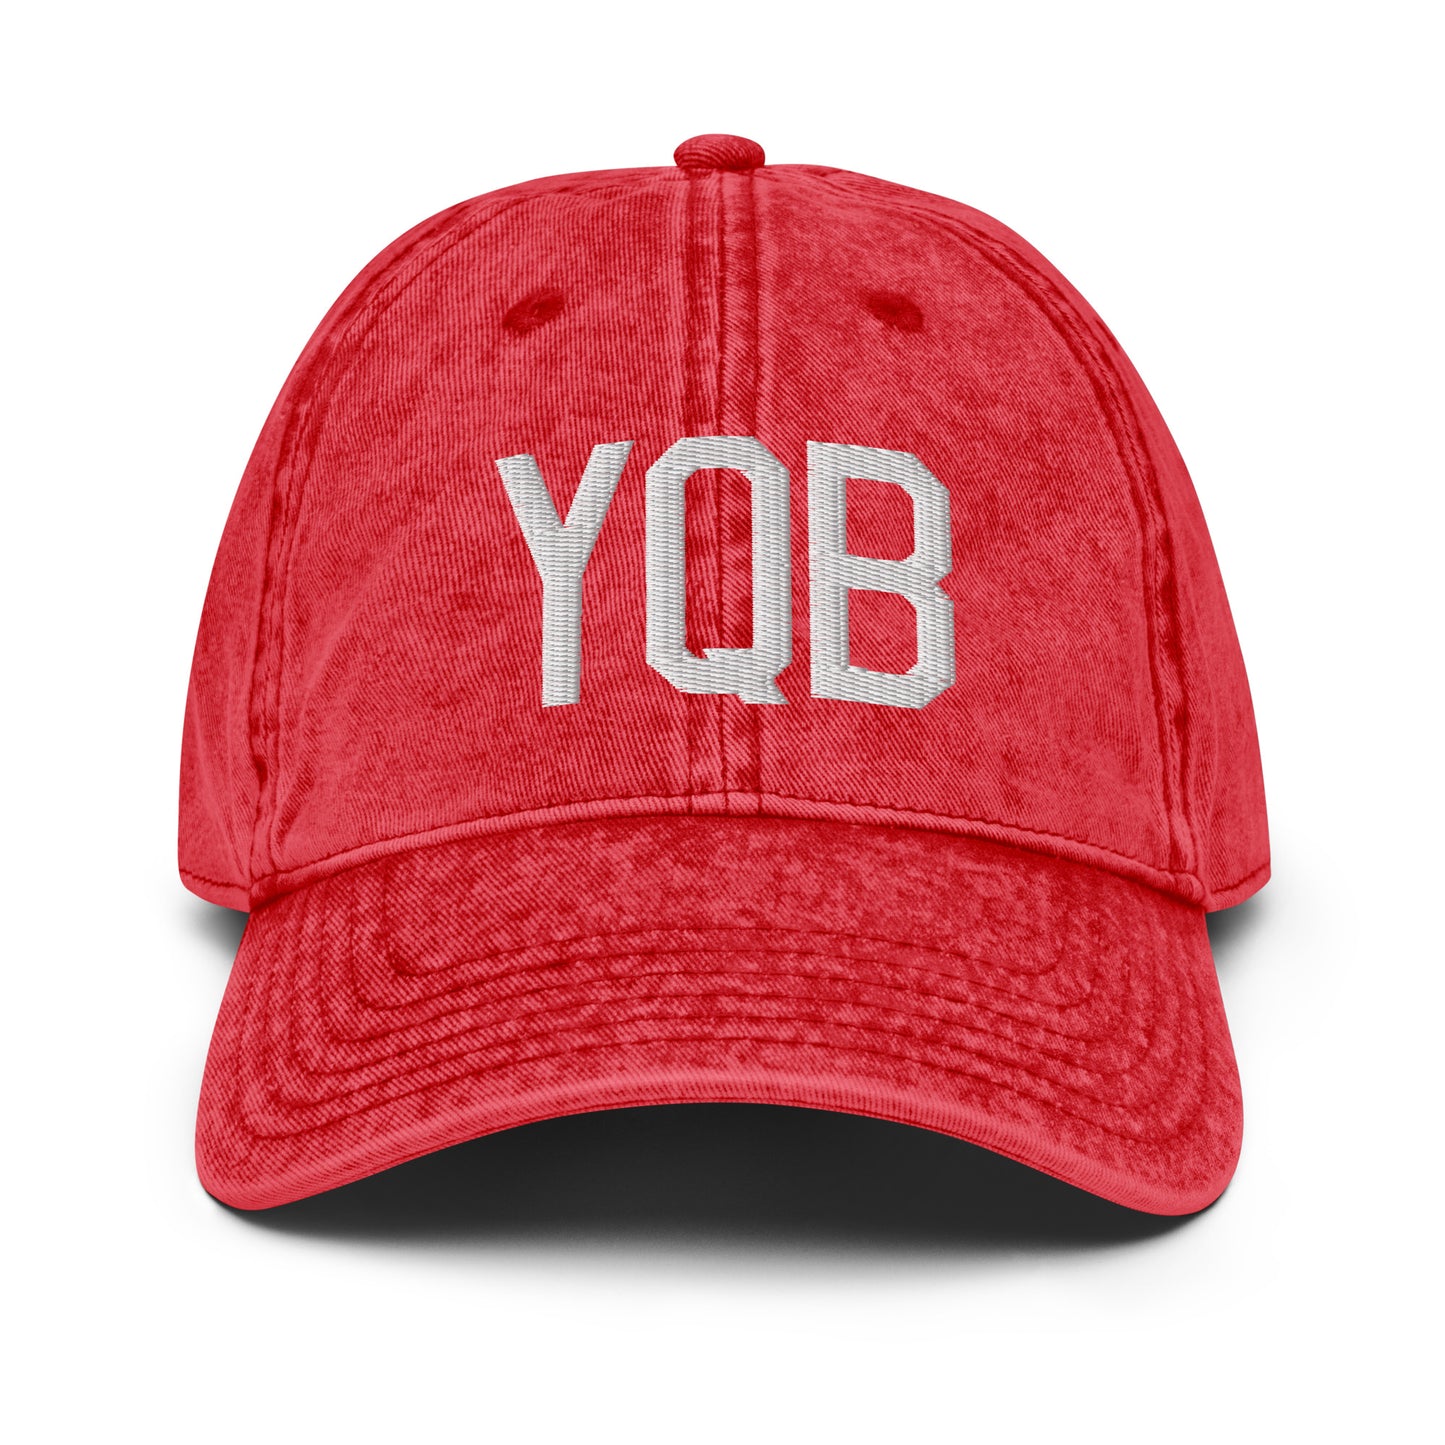 Airport Code Twill Cap - White • YQB Quebec City • YHM Designs - Image 22